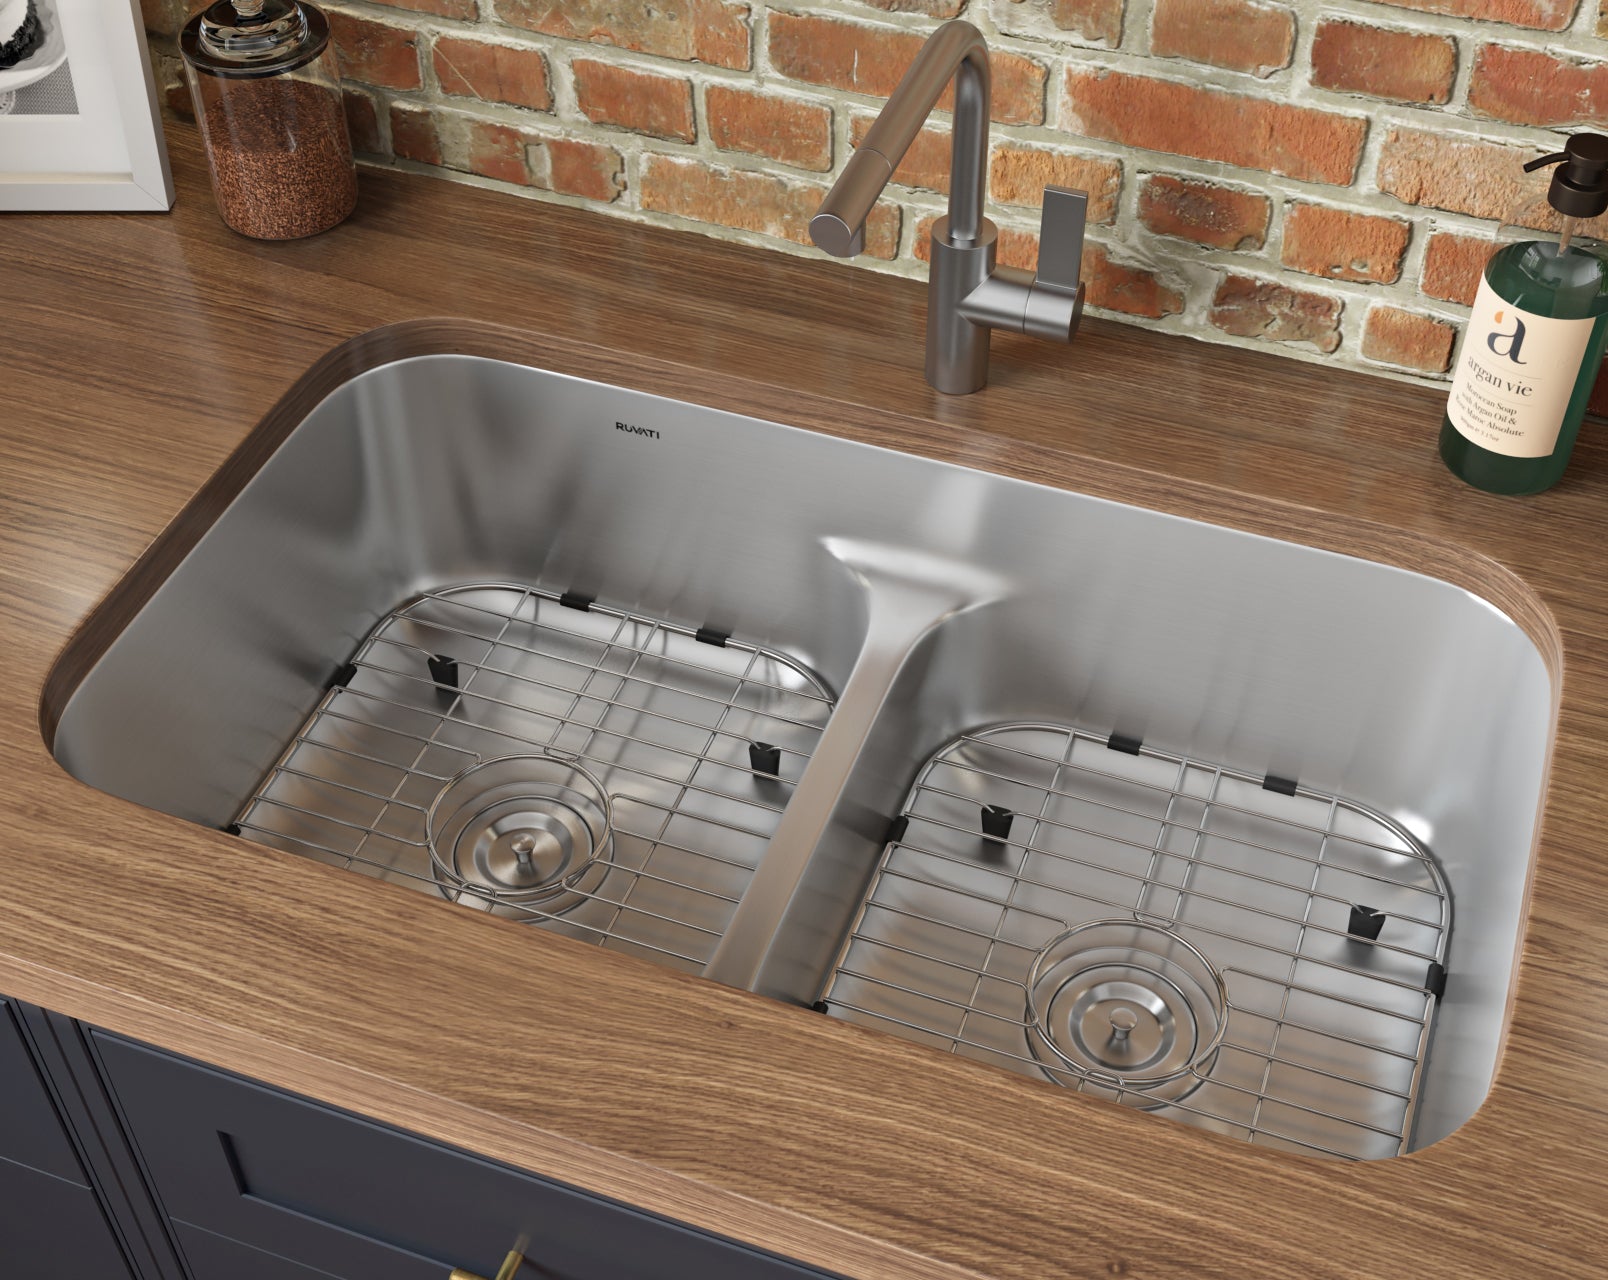 32-inch Low-Divide 50/50 Double Bowl Undermount 16 Gauge Stainless Steel Kitchen Sink